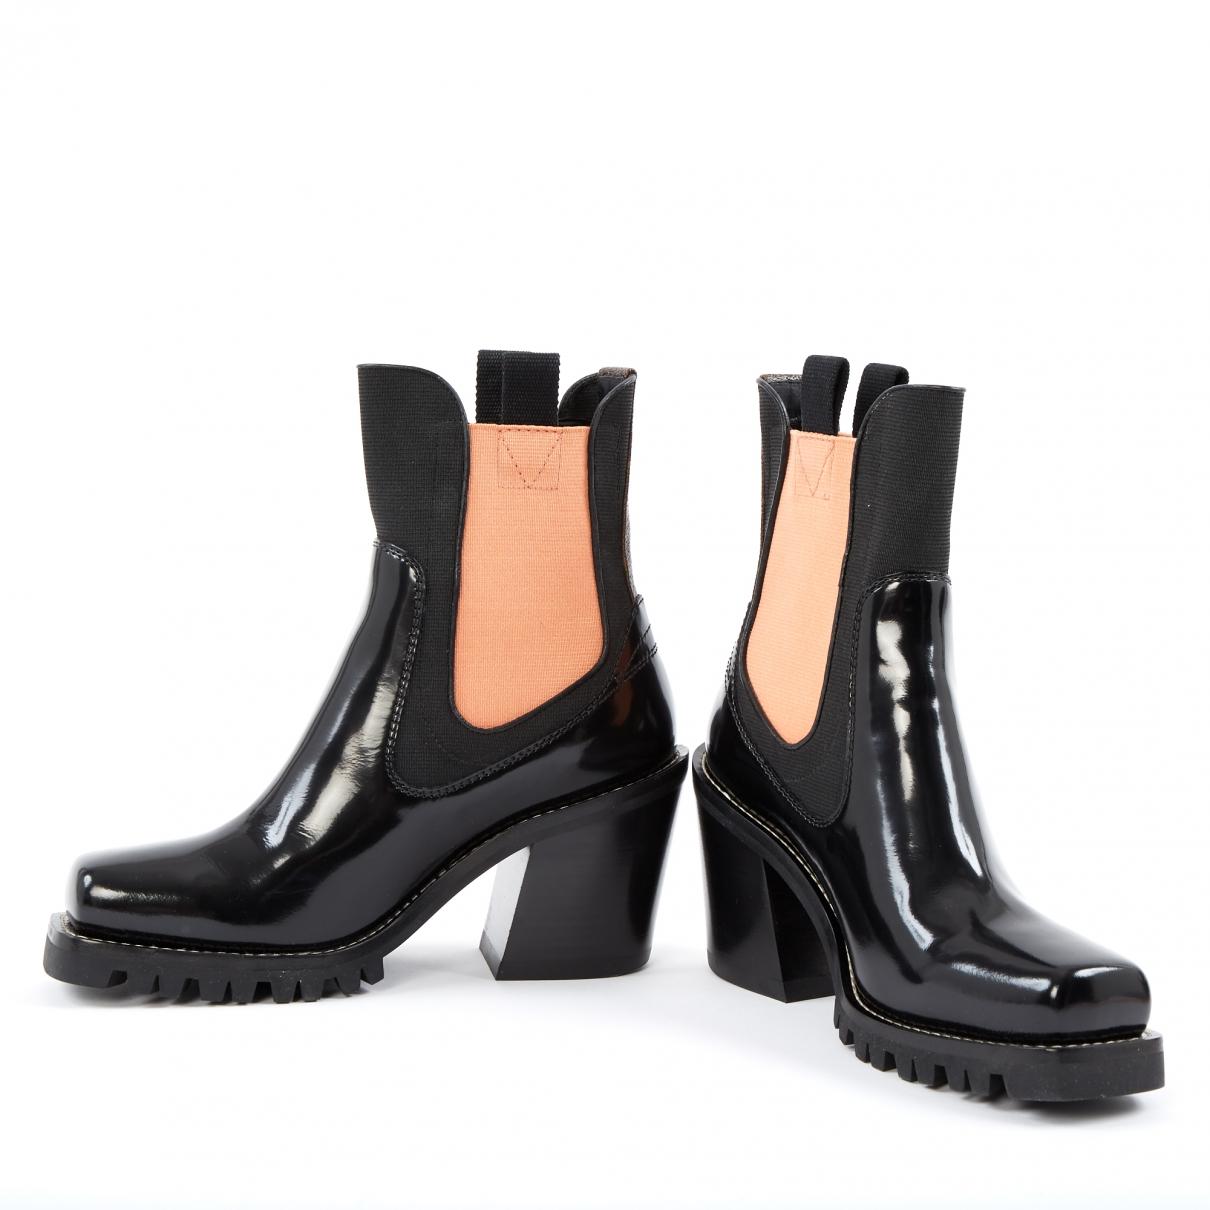 Louis Vuitton Limitless Black Patent Leather Ankle Boots in Black - Lyst